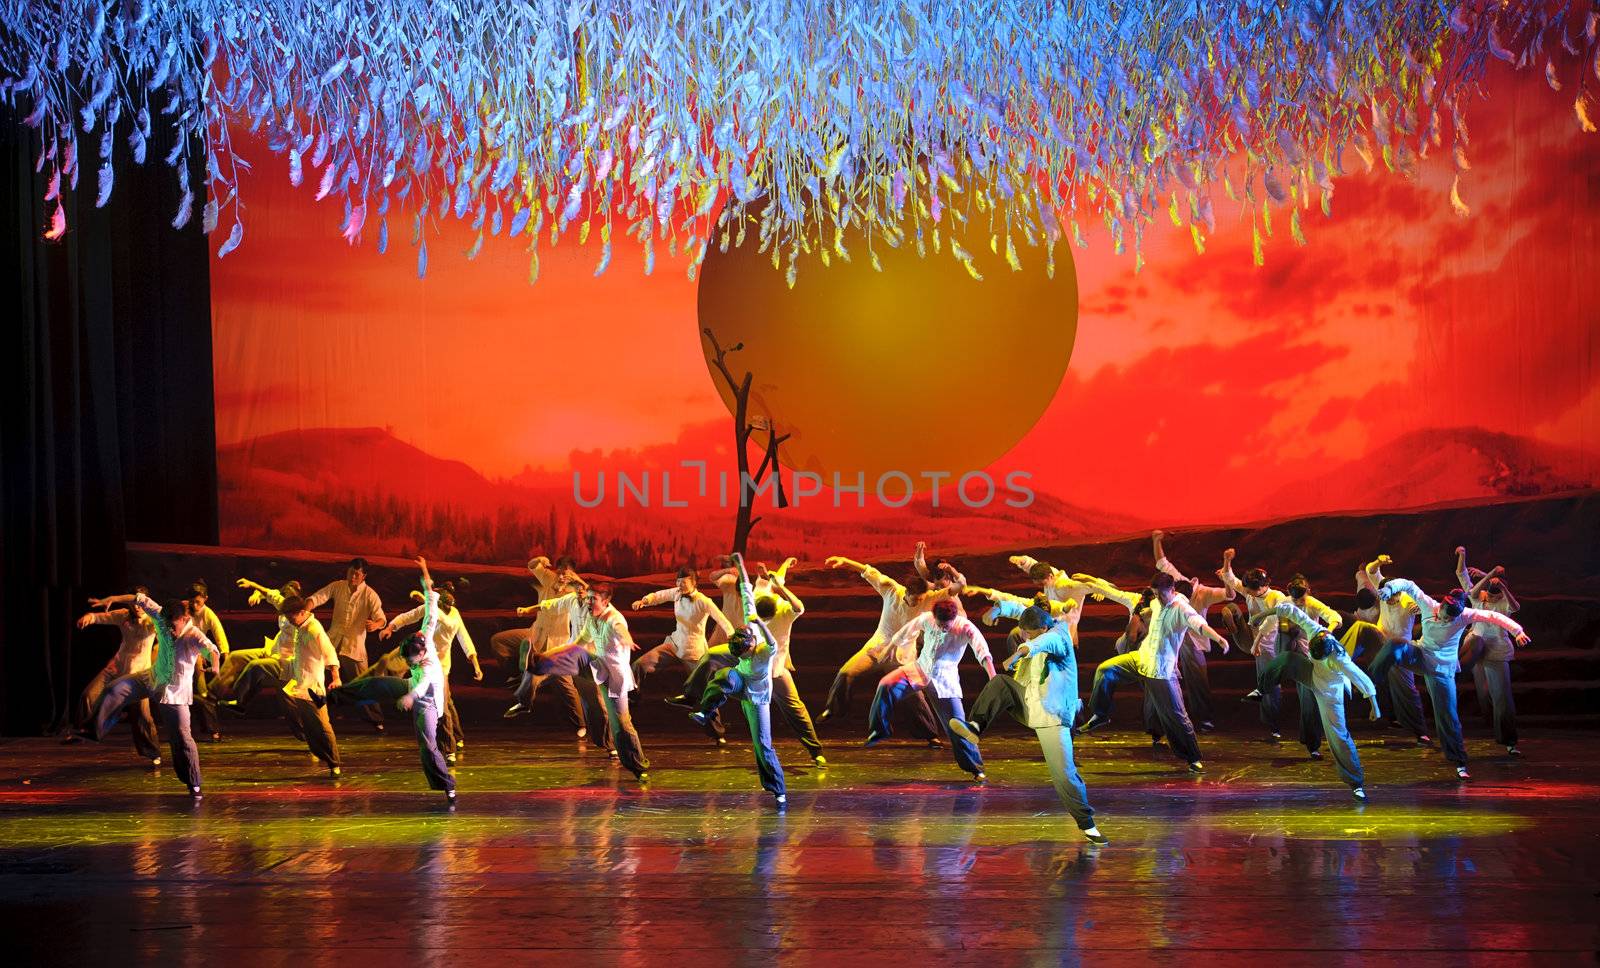 CHENGDU - Nov 18: the famous chinese dance drama "Railway Guerrillas" performed by ZongZheng dance troupe at JINCHENG theater on Nov 18, 2010 in Chengdu, China.